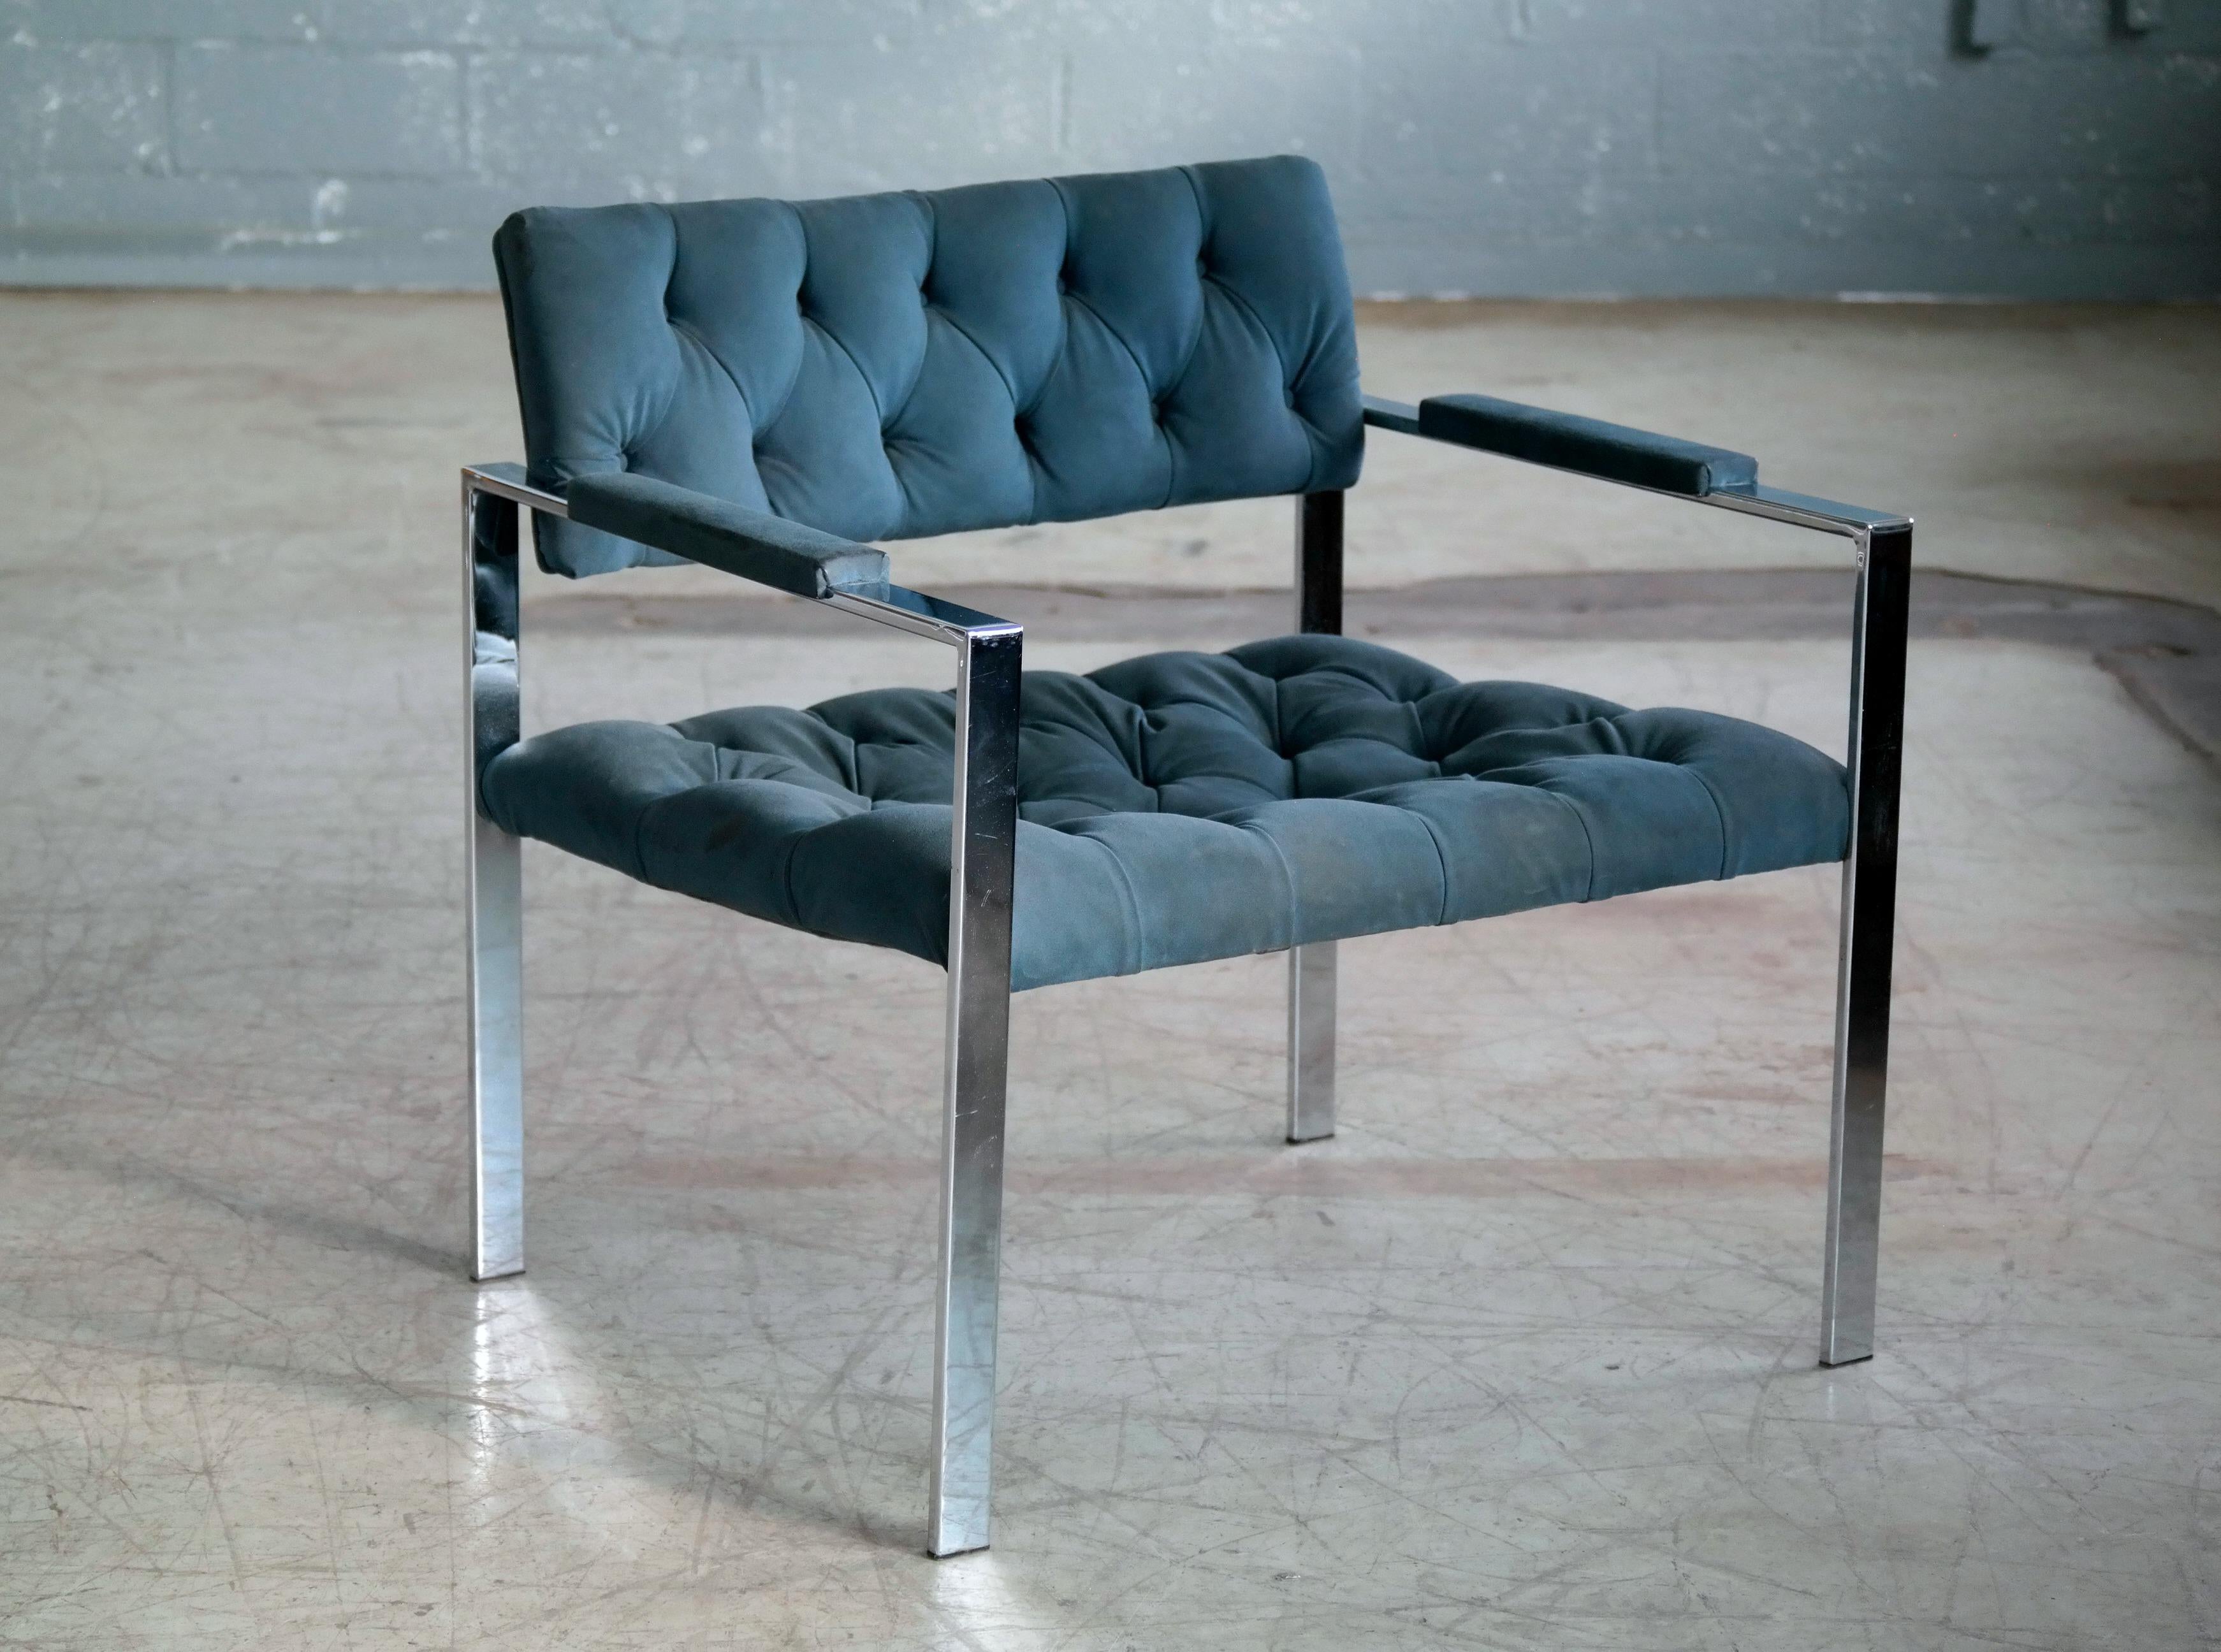 Beautiful 1960s Harvey Probber style modern lounge chair in chromed steel with seat arm and back rests in tufted teal colored velvet. Generous elegant proportions and very comfortably padded with a highly polished chrome fame, this Harvey Probber